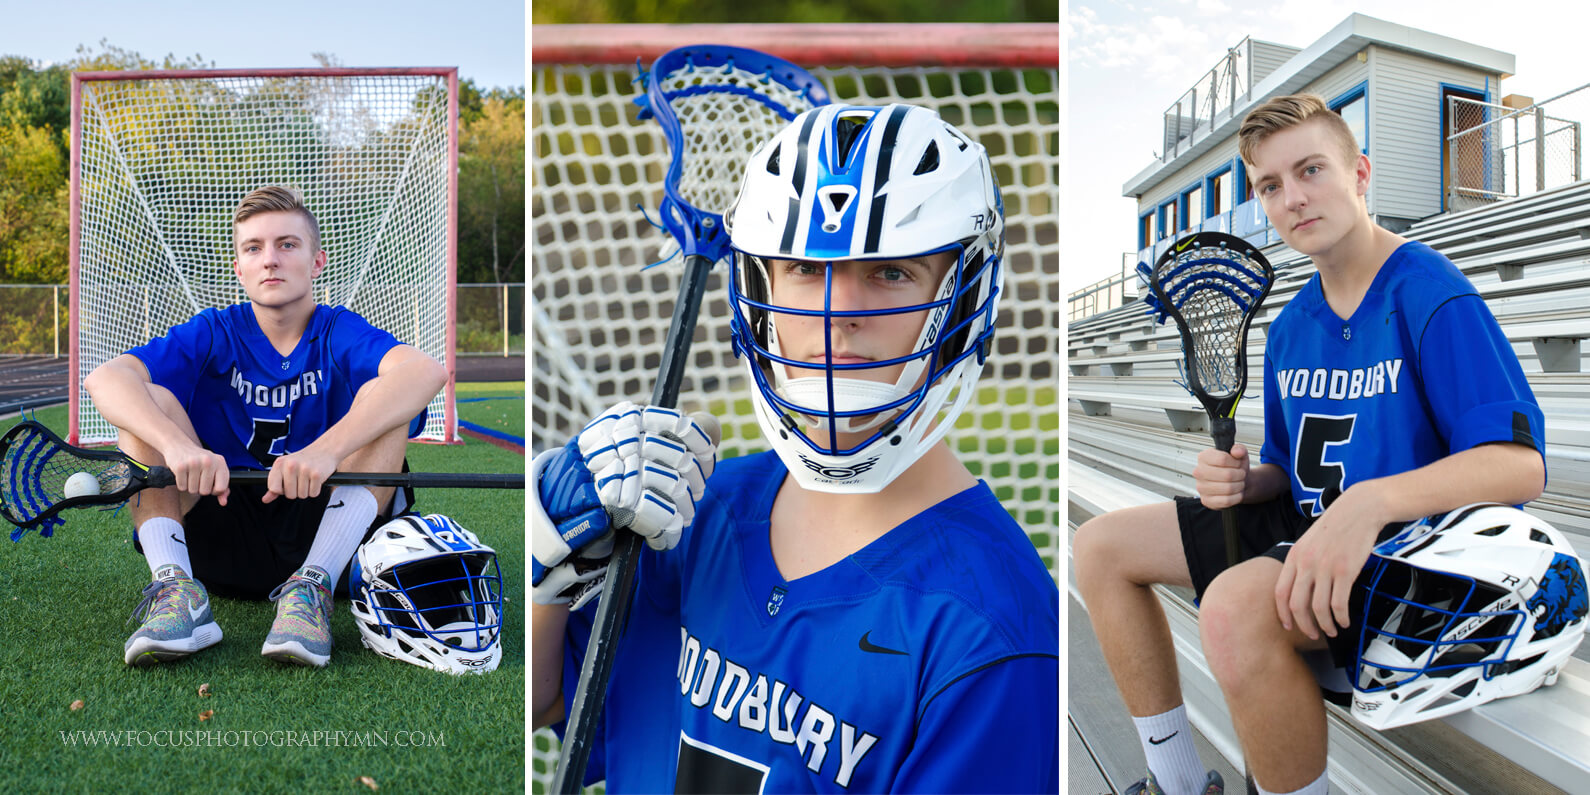 Woodbury Photographer Lacrosse | Focus Photography by Susan